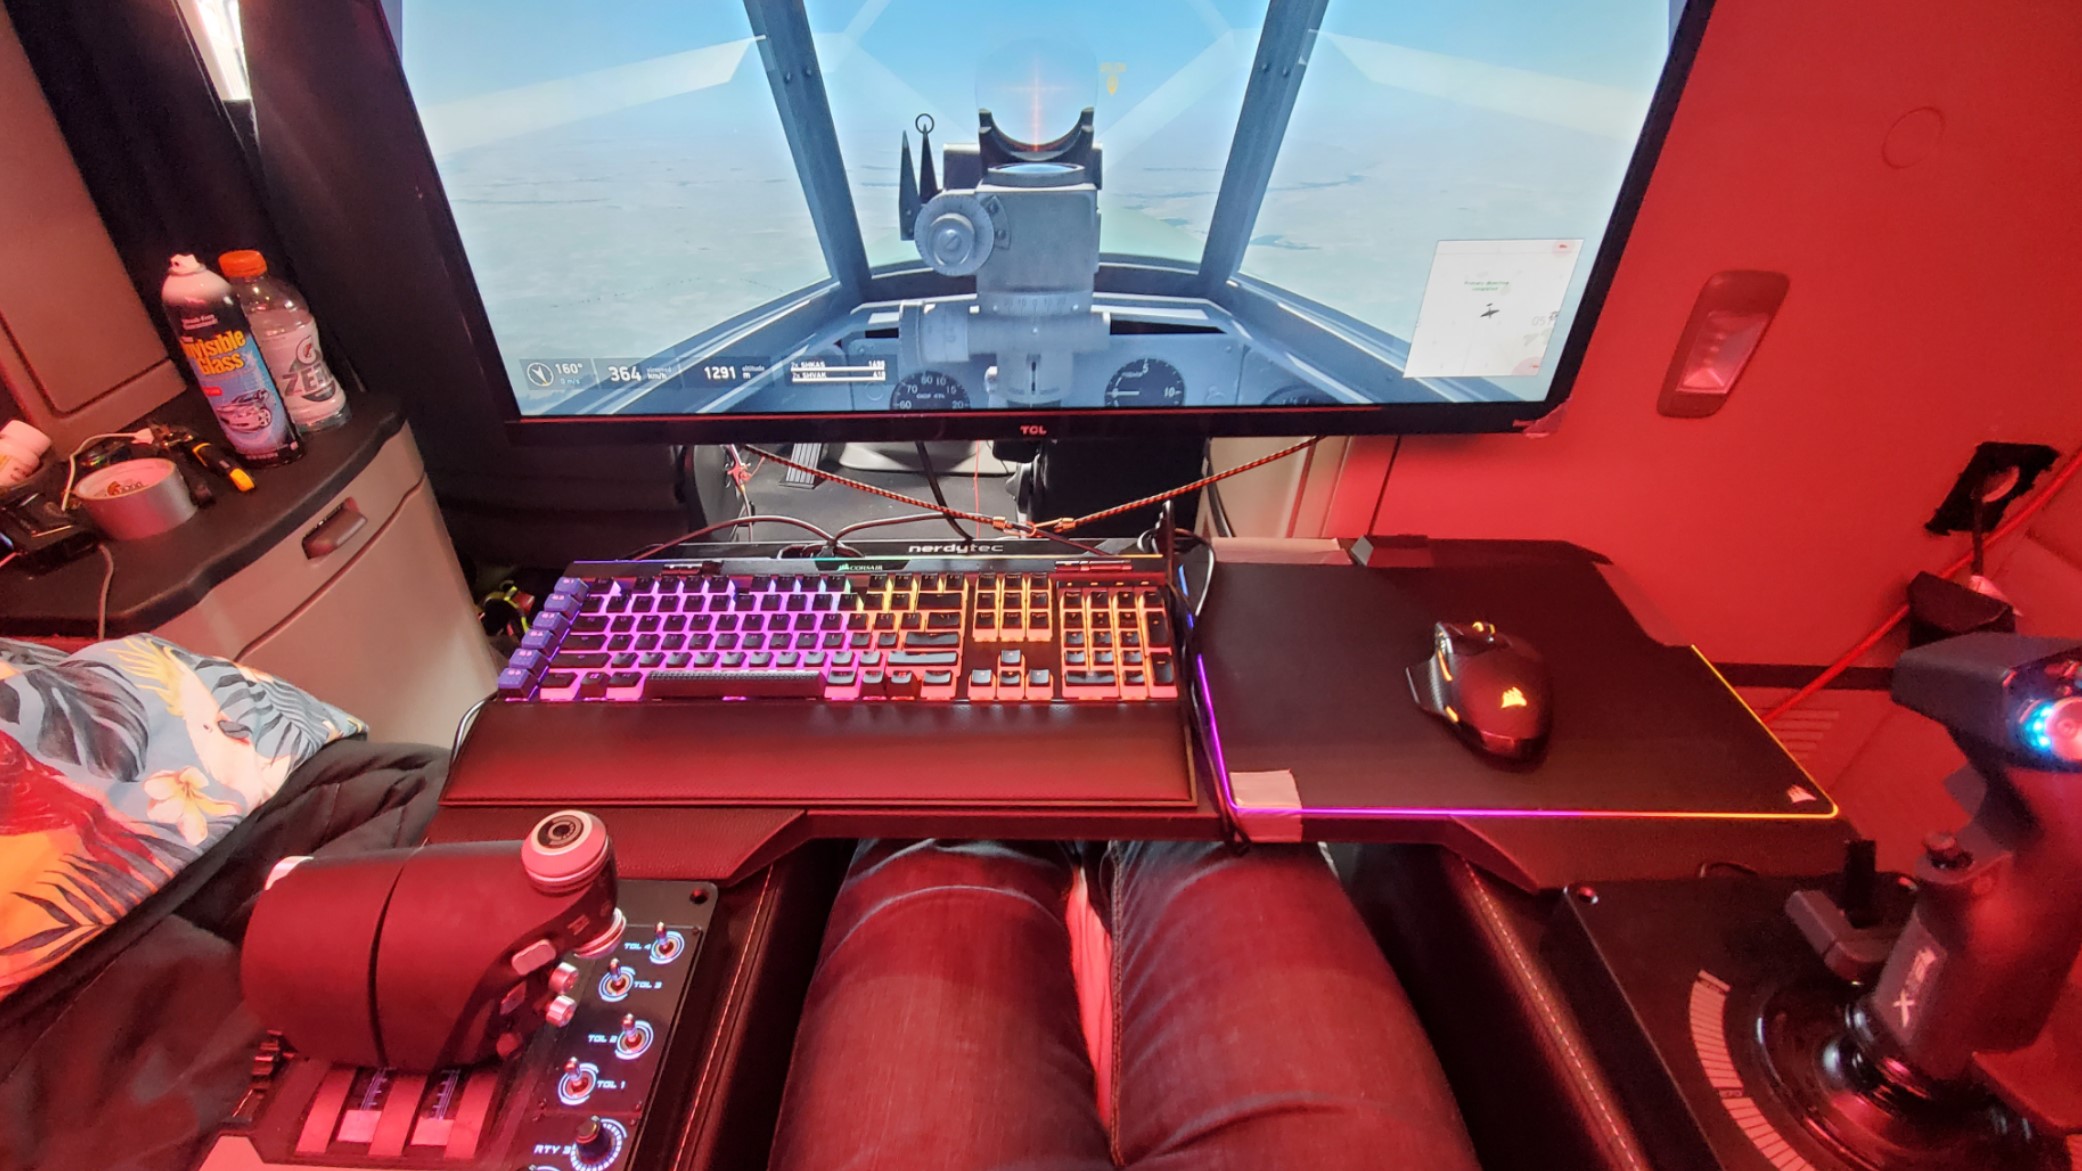 Gaming while trucking: check out this PC setup in a semi | PCGamesN